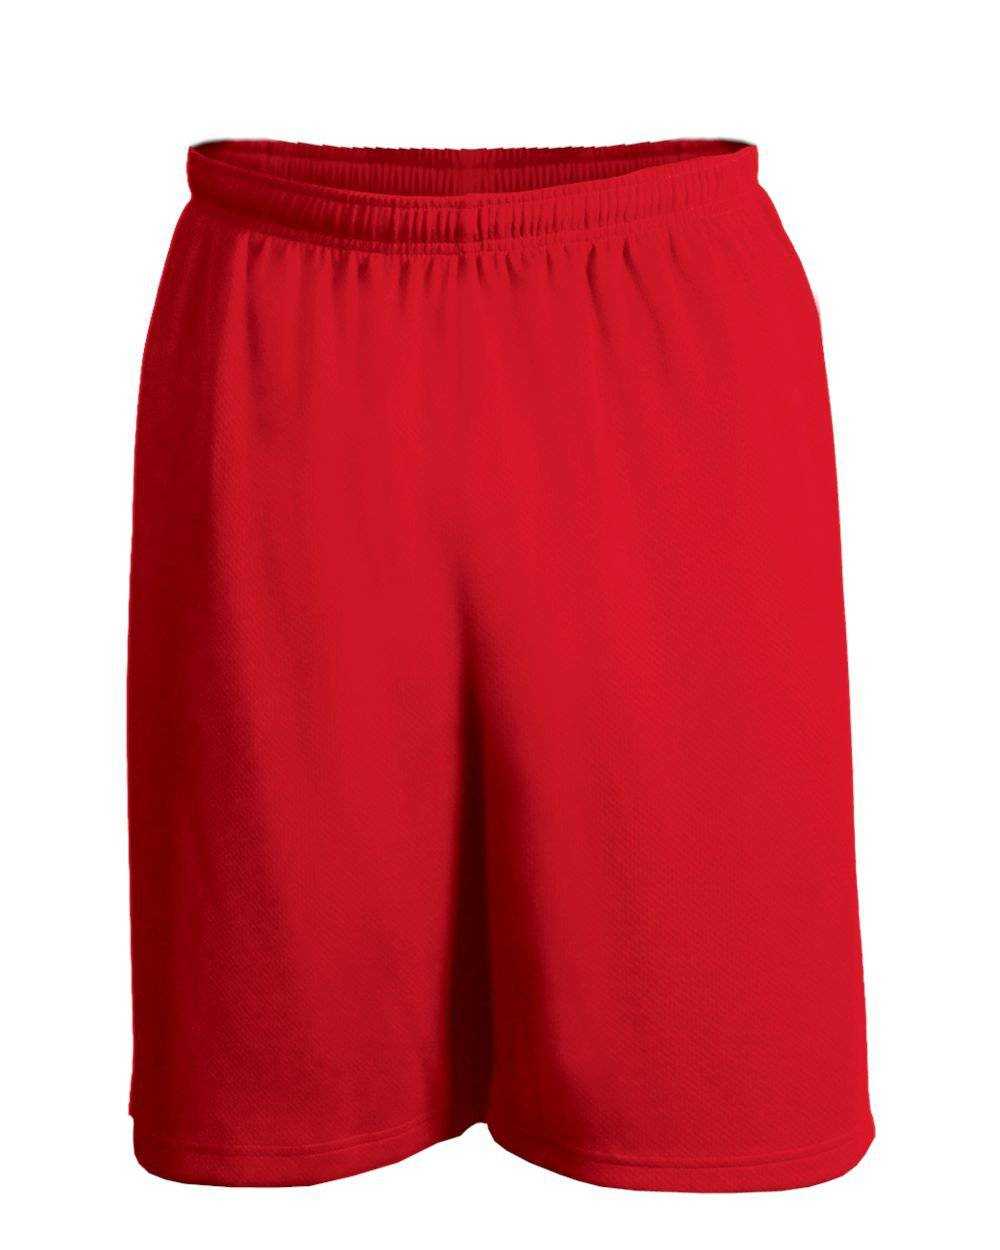 C2 Sport 5137 Mock Mesh 7" Short - Red - HIT a Double - 1